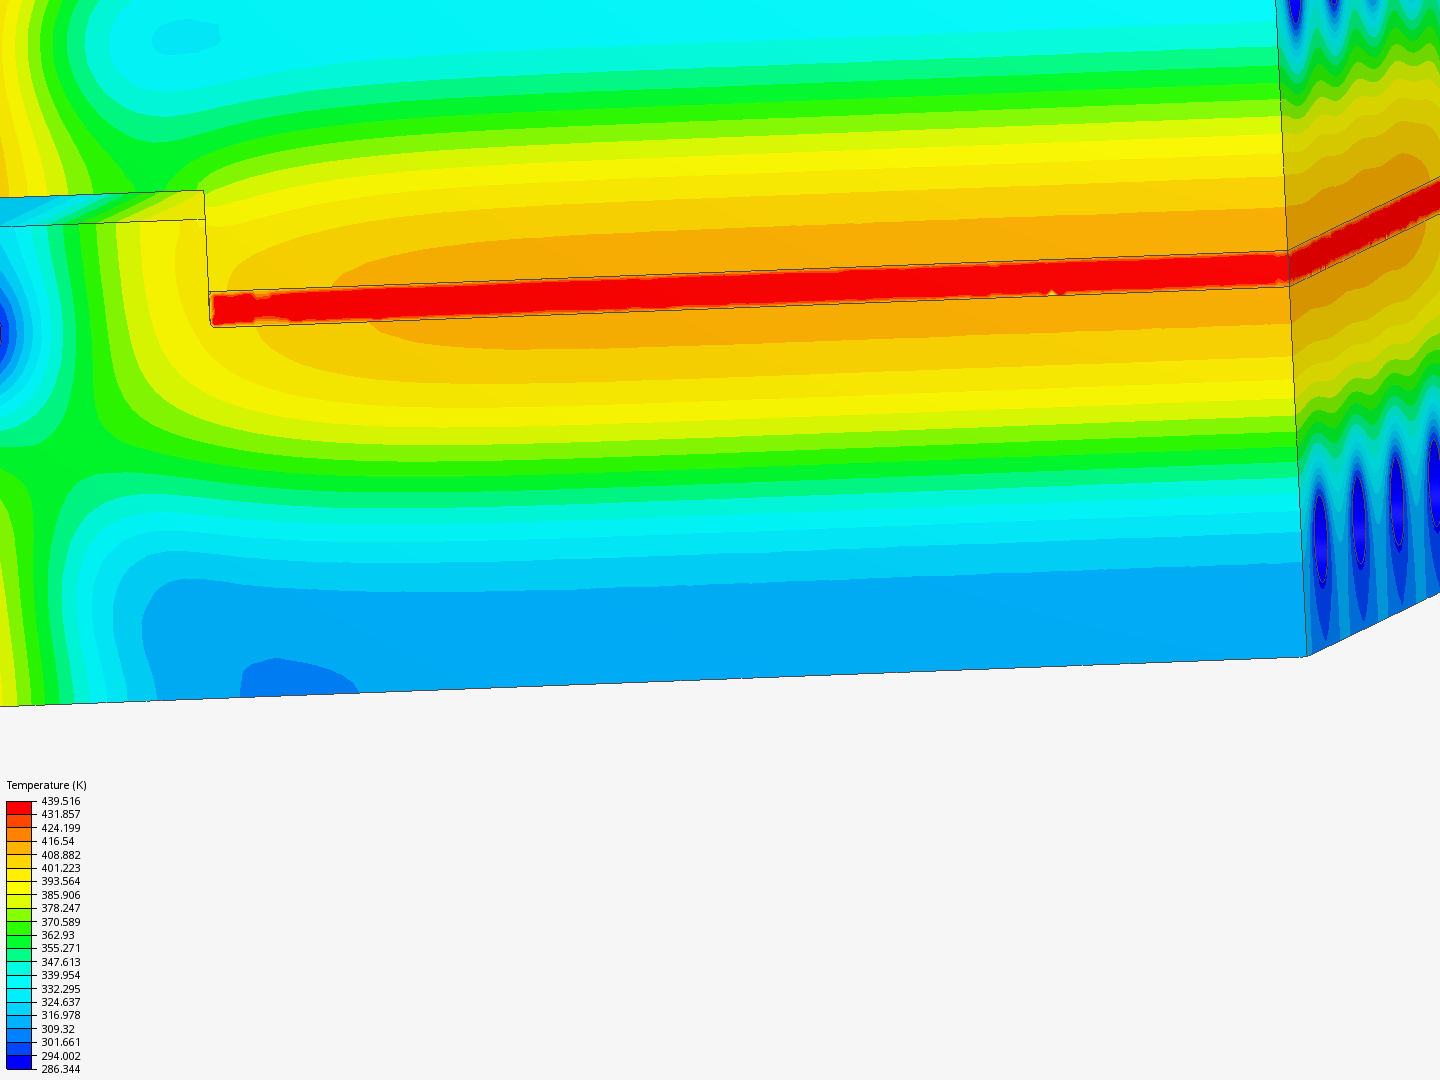 Assembly cooling simulation image